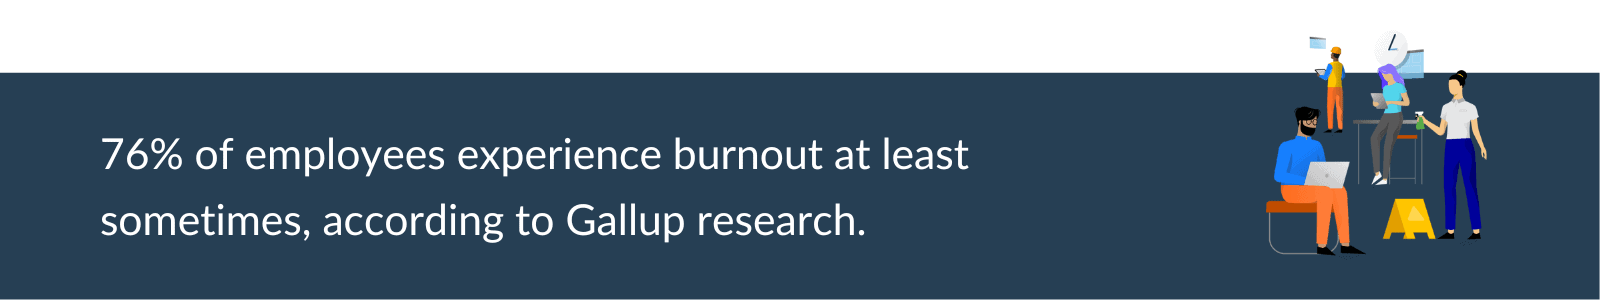 76% of employees experience burnout at least sometimes, according to Gallup research.